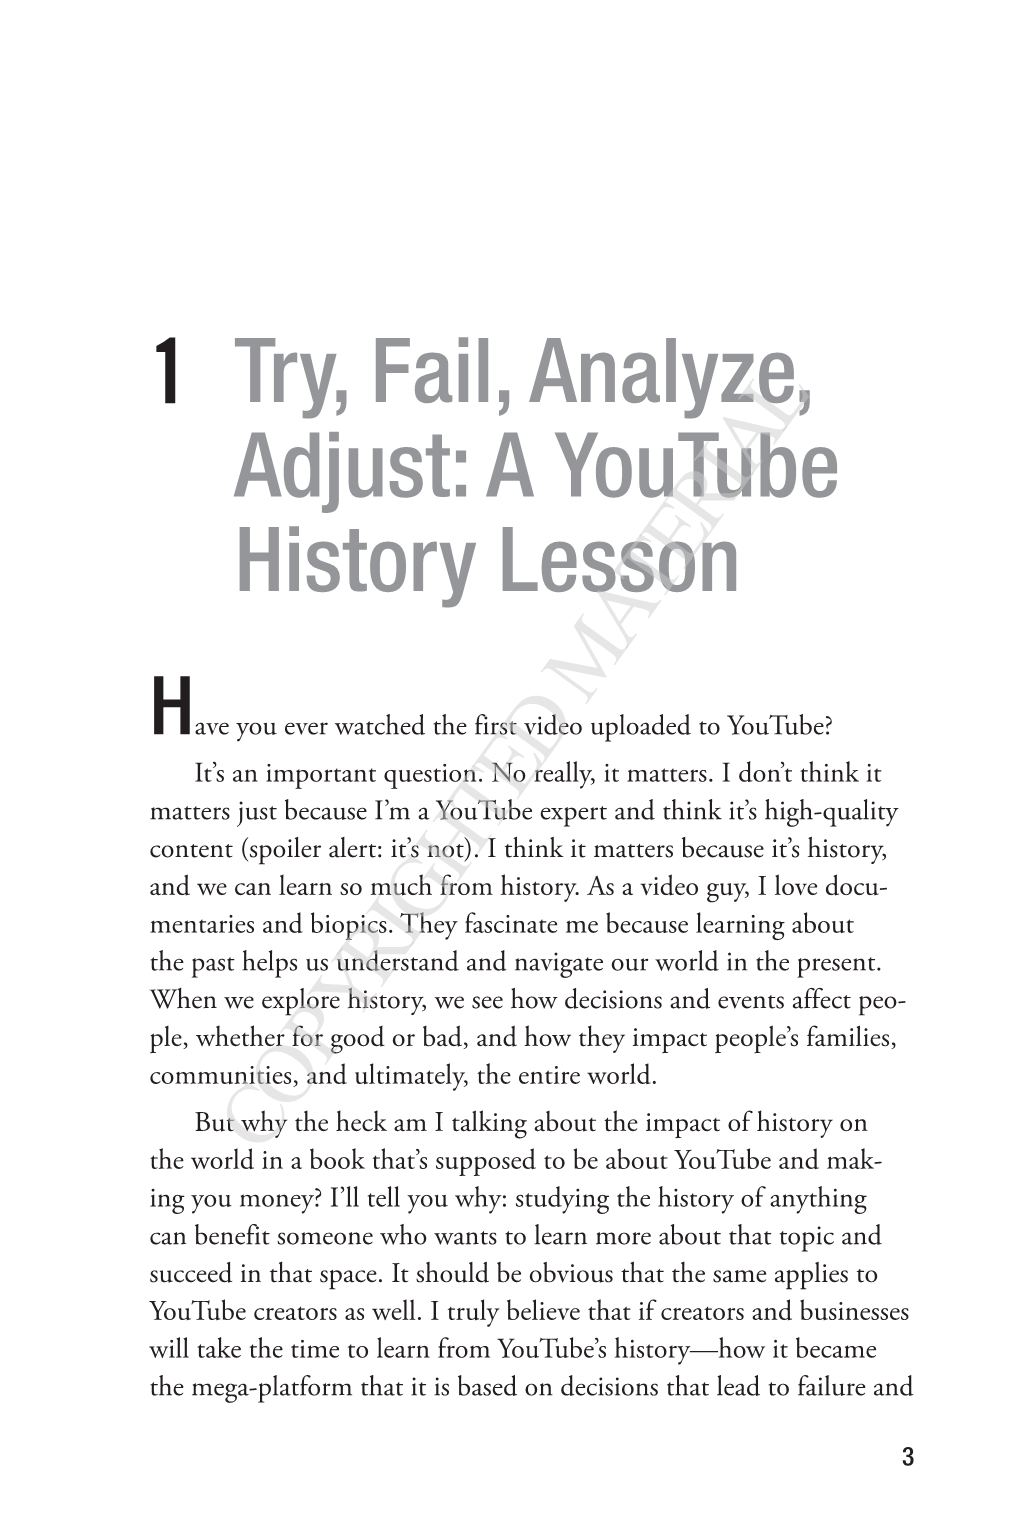 Try, Fail, Analyze, Adjust: a Youtube History Lesson